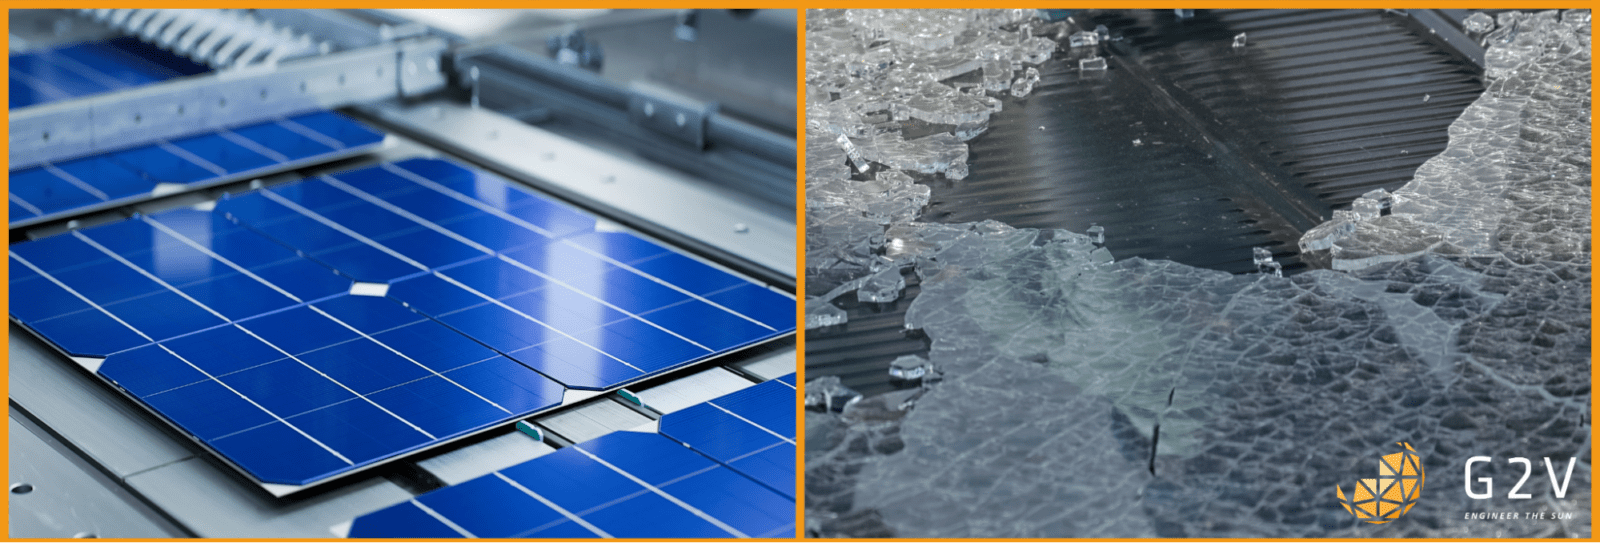 solar panel in manufacturing vs out in the cold with ice formation